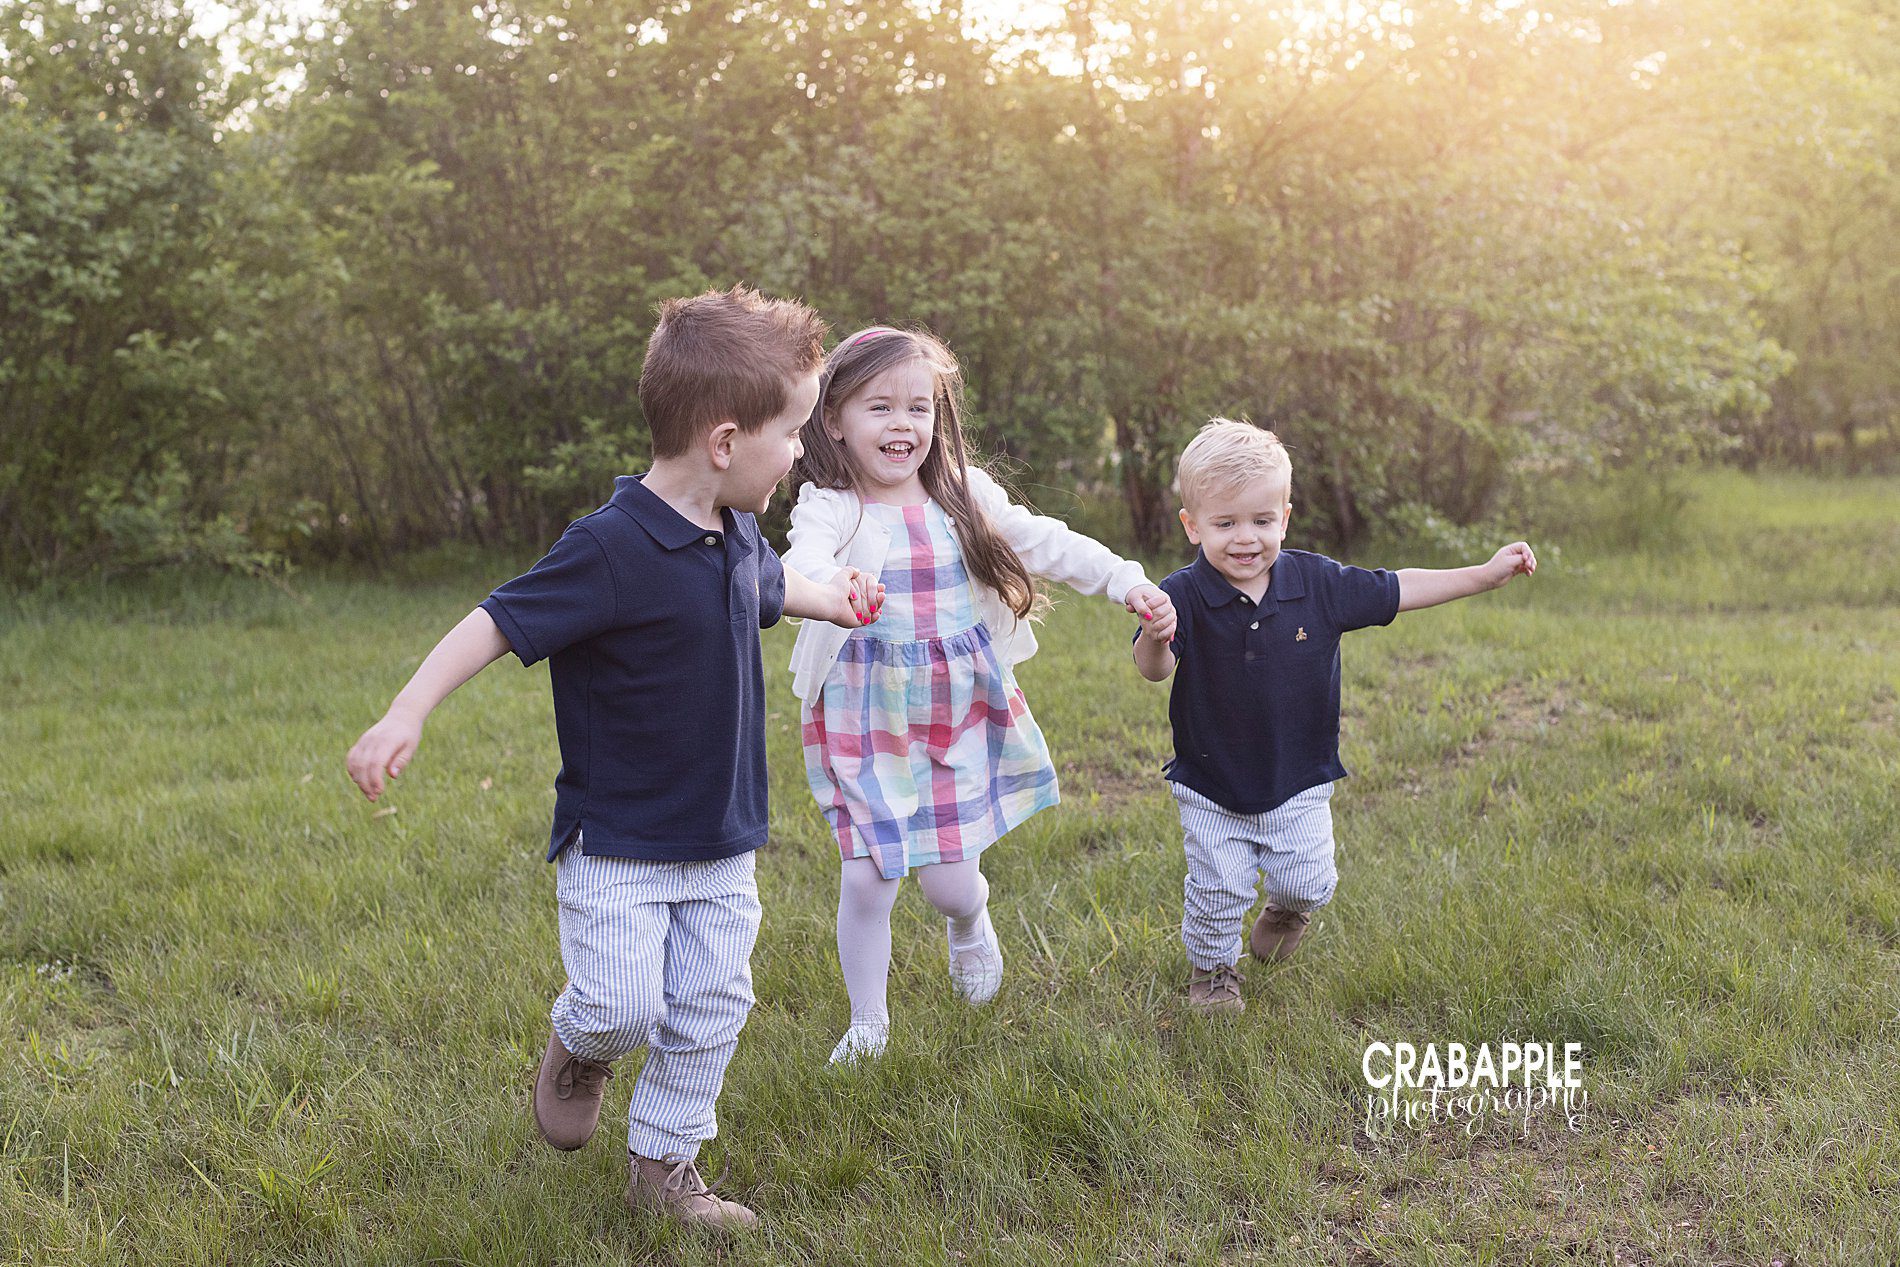 Fun sibling portrait ideas for spring